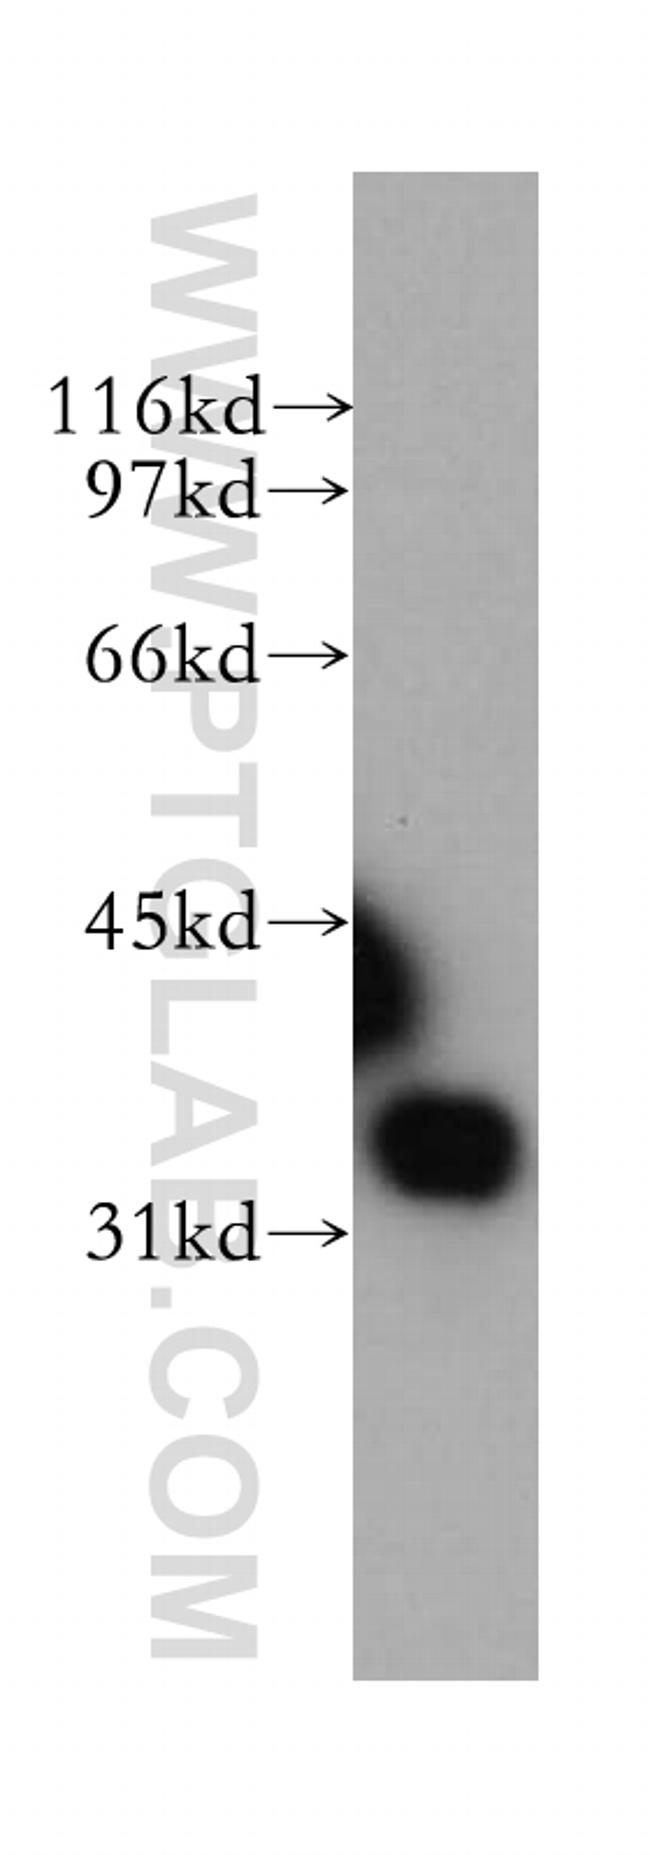 SULT1E1 Antibody in Western Blot (WB)